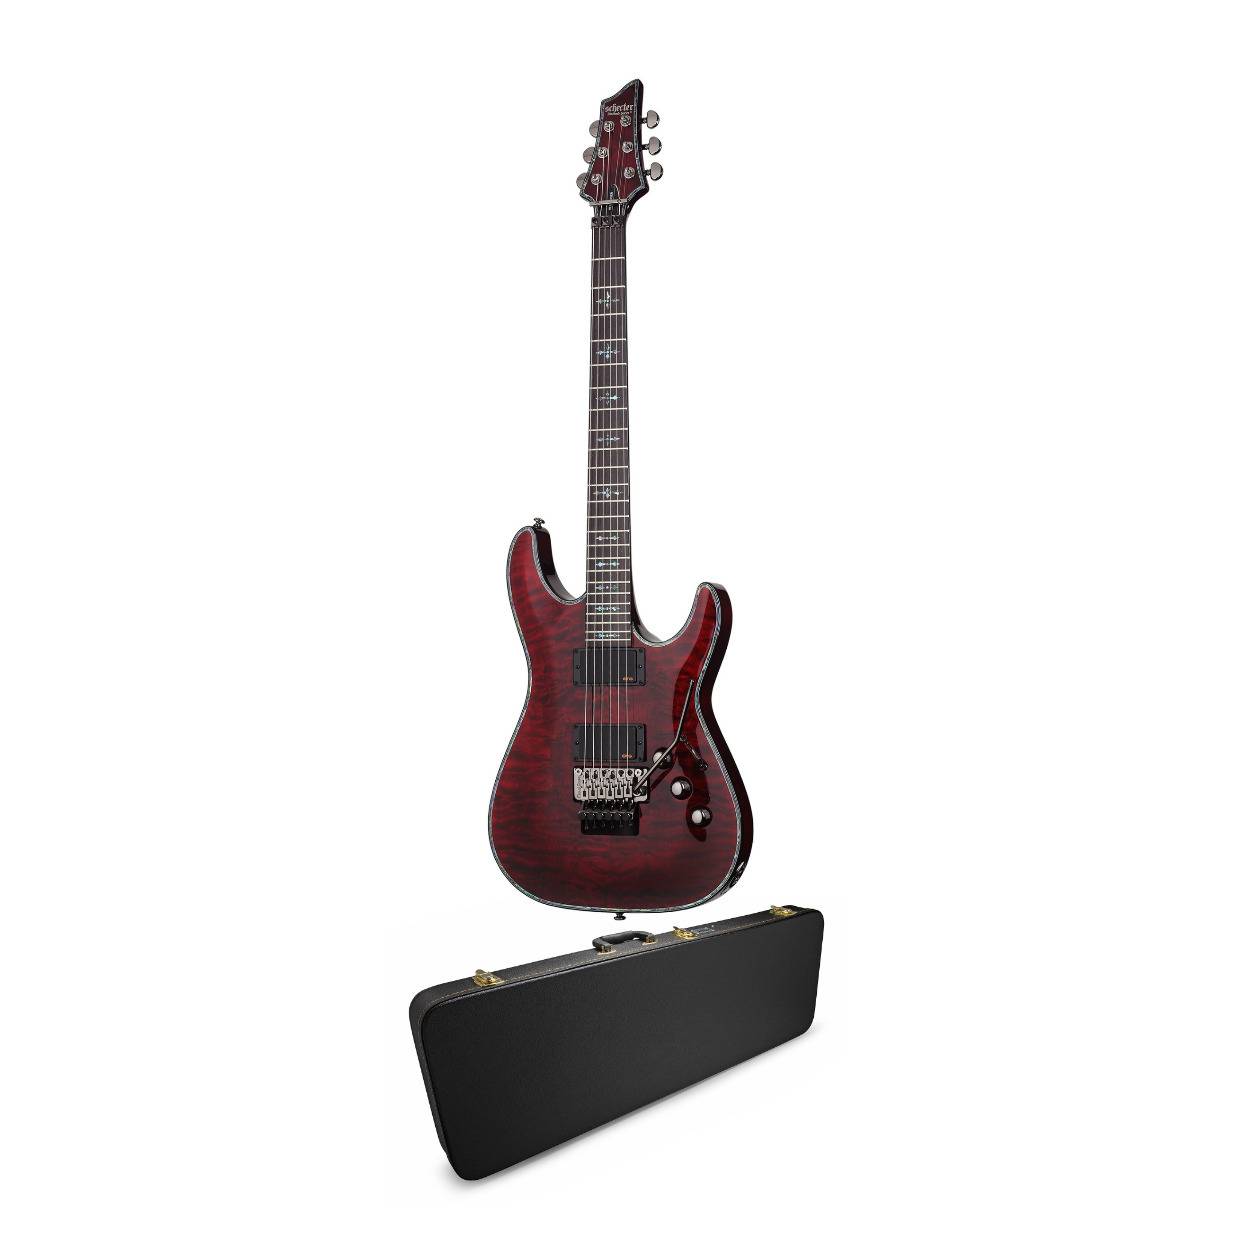 Schecter Hellraiser C-1 FR Electric Guitar (Black Cherry) with Hard Shell Carrying Case